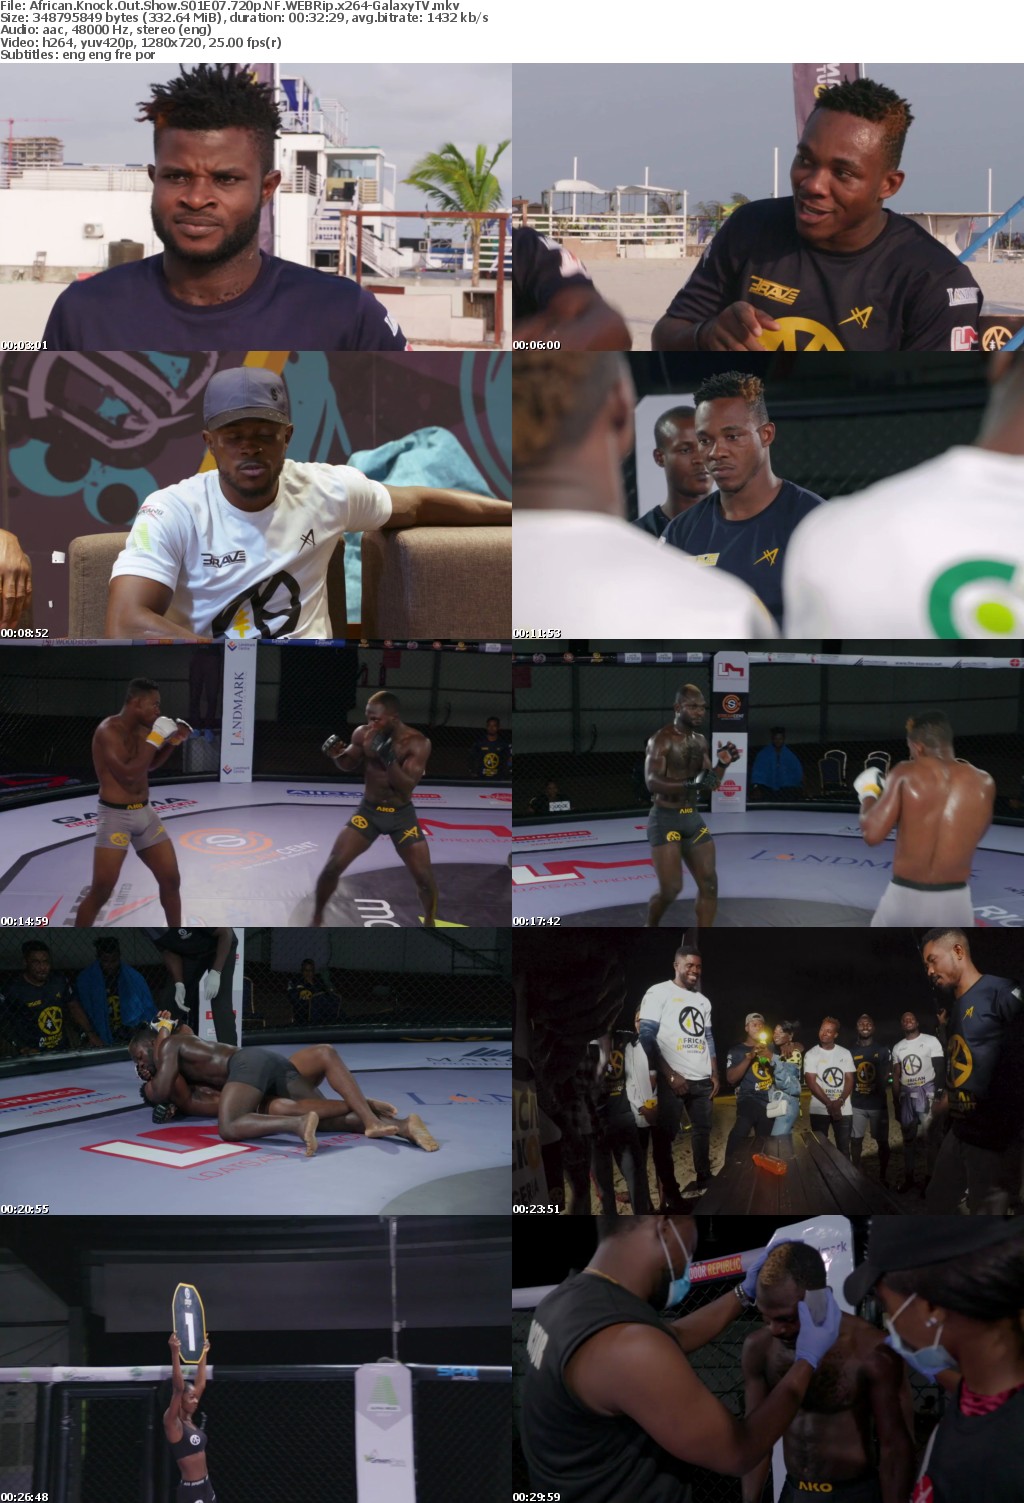 African Knock Out Show S01 COMPLETE 720p NF WEBRip x264-GalaxyTV